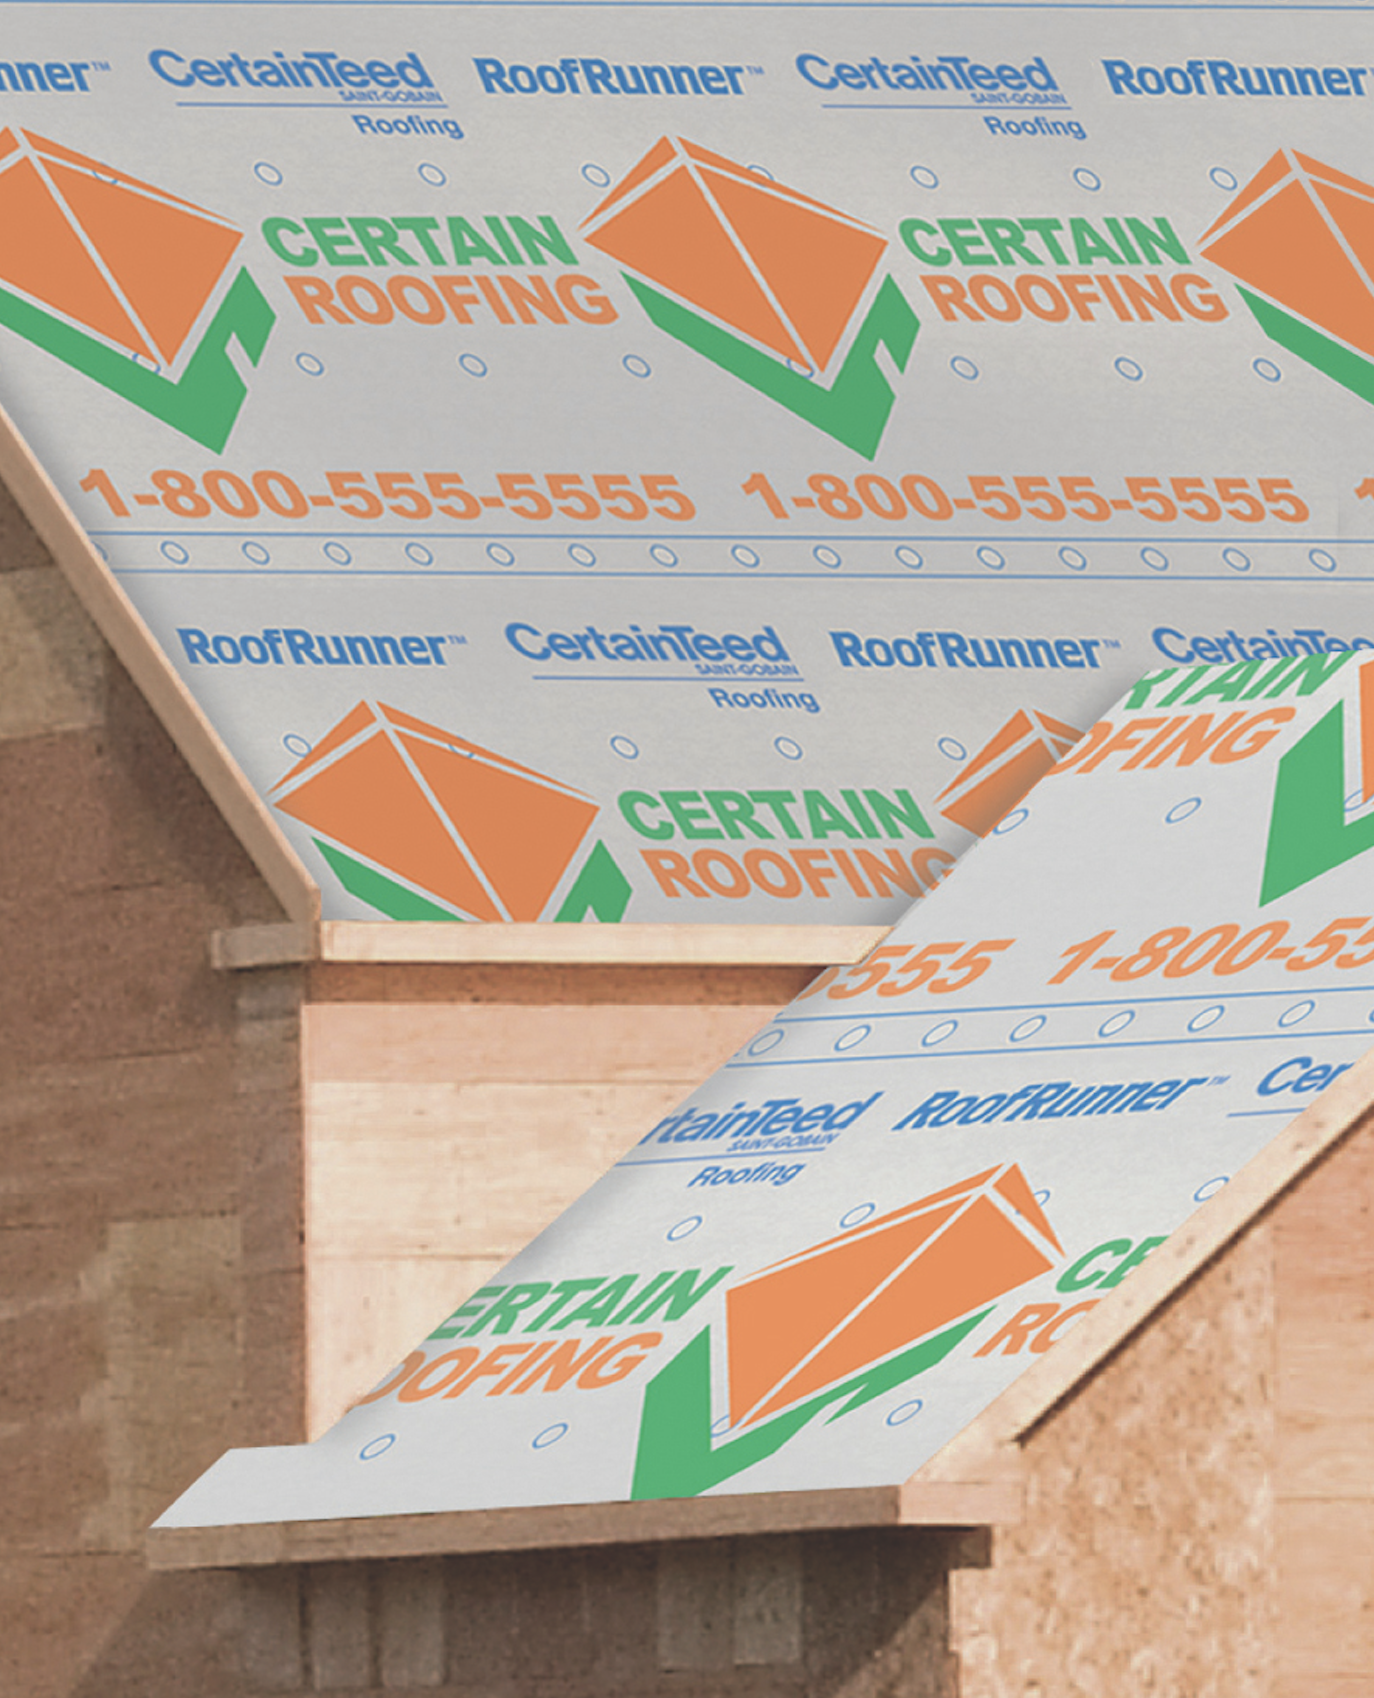 CertainTeed’s RoofRunner underlayment can now be customized